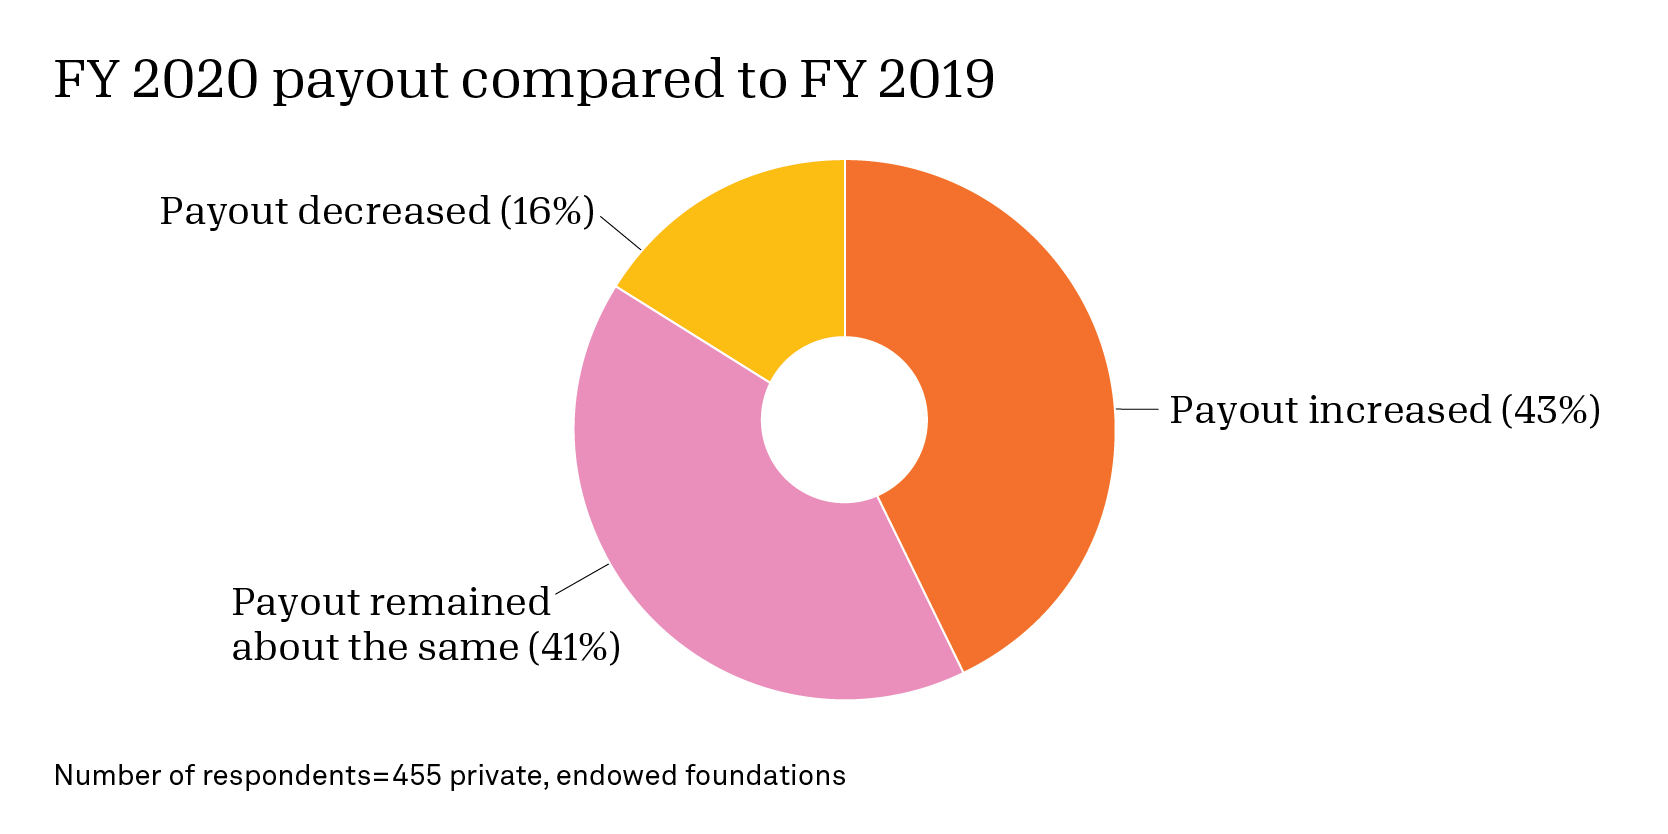 Pie chart of FY 2020 payout compared to FY 2019